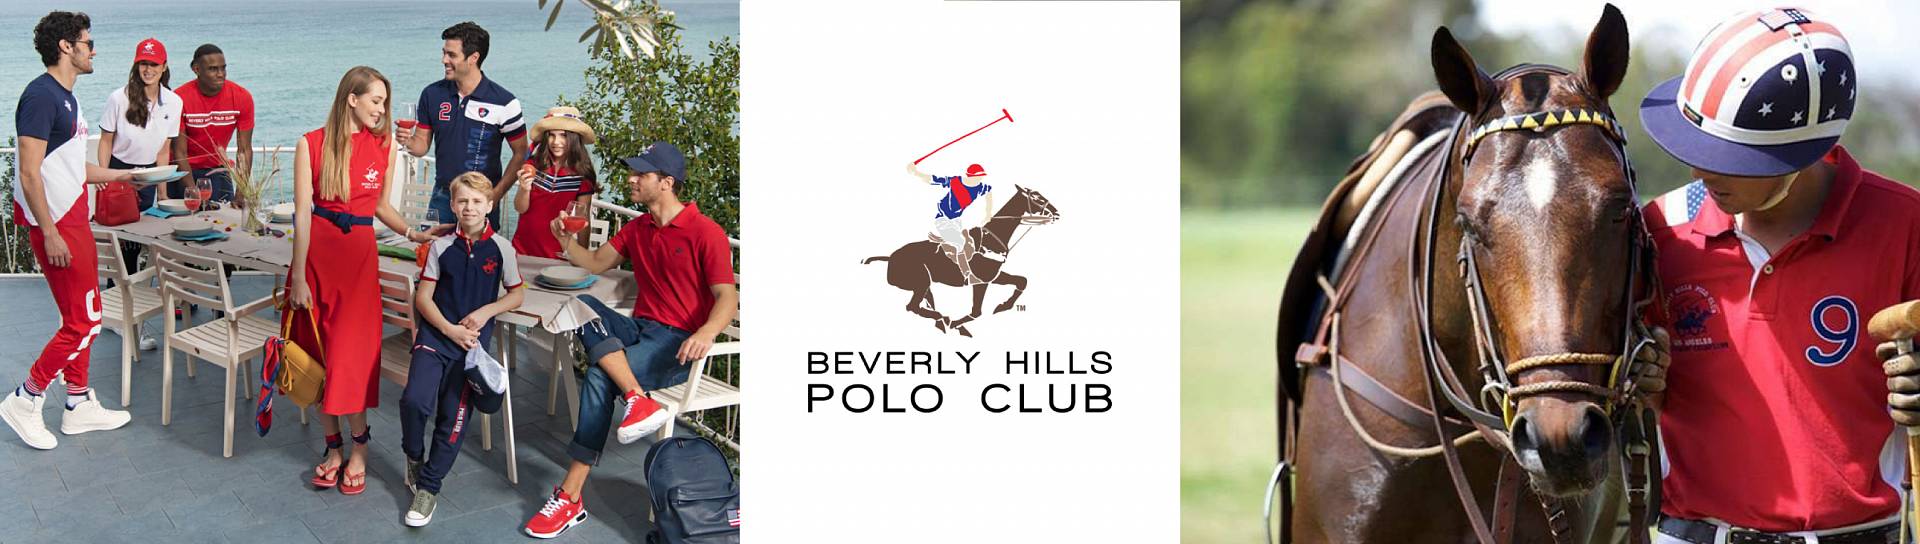 Beverly Hills Polo Club 